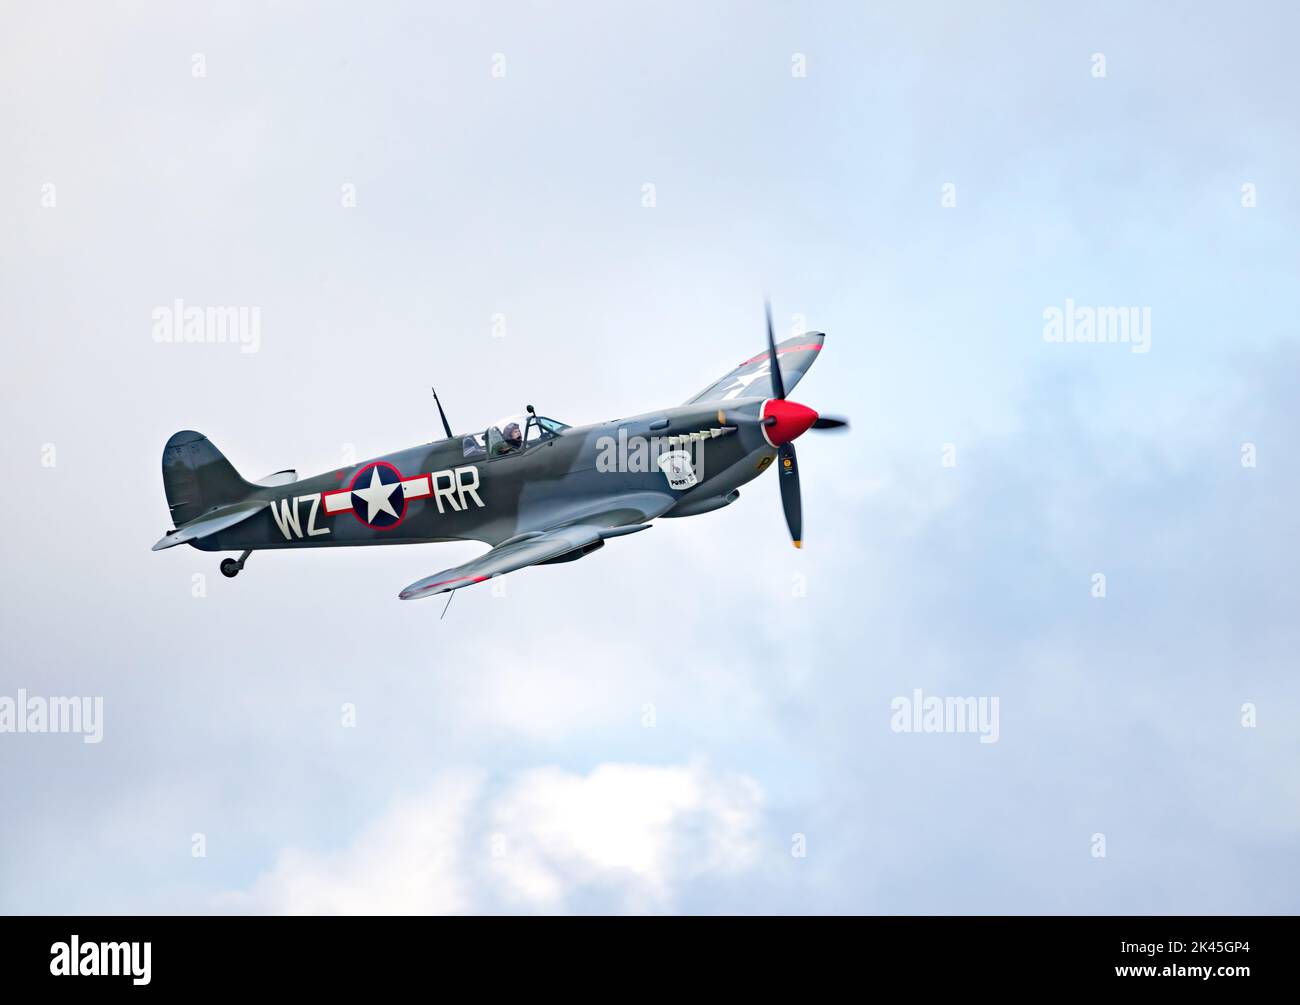 Vintage plane; Spitfire Mk XVI flying in american colours, WW2 fighter plane, Imperial War Museum Duxford Airshow, UK Stock Photo